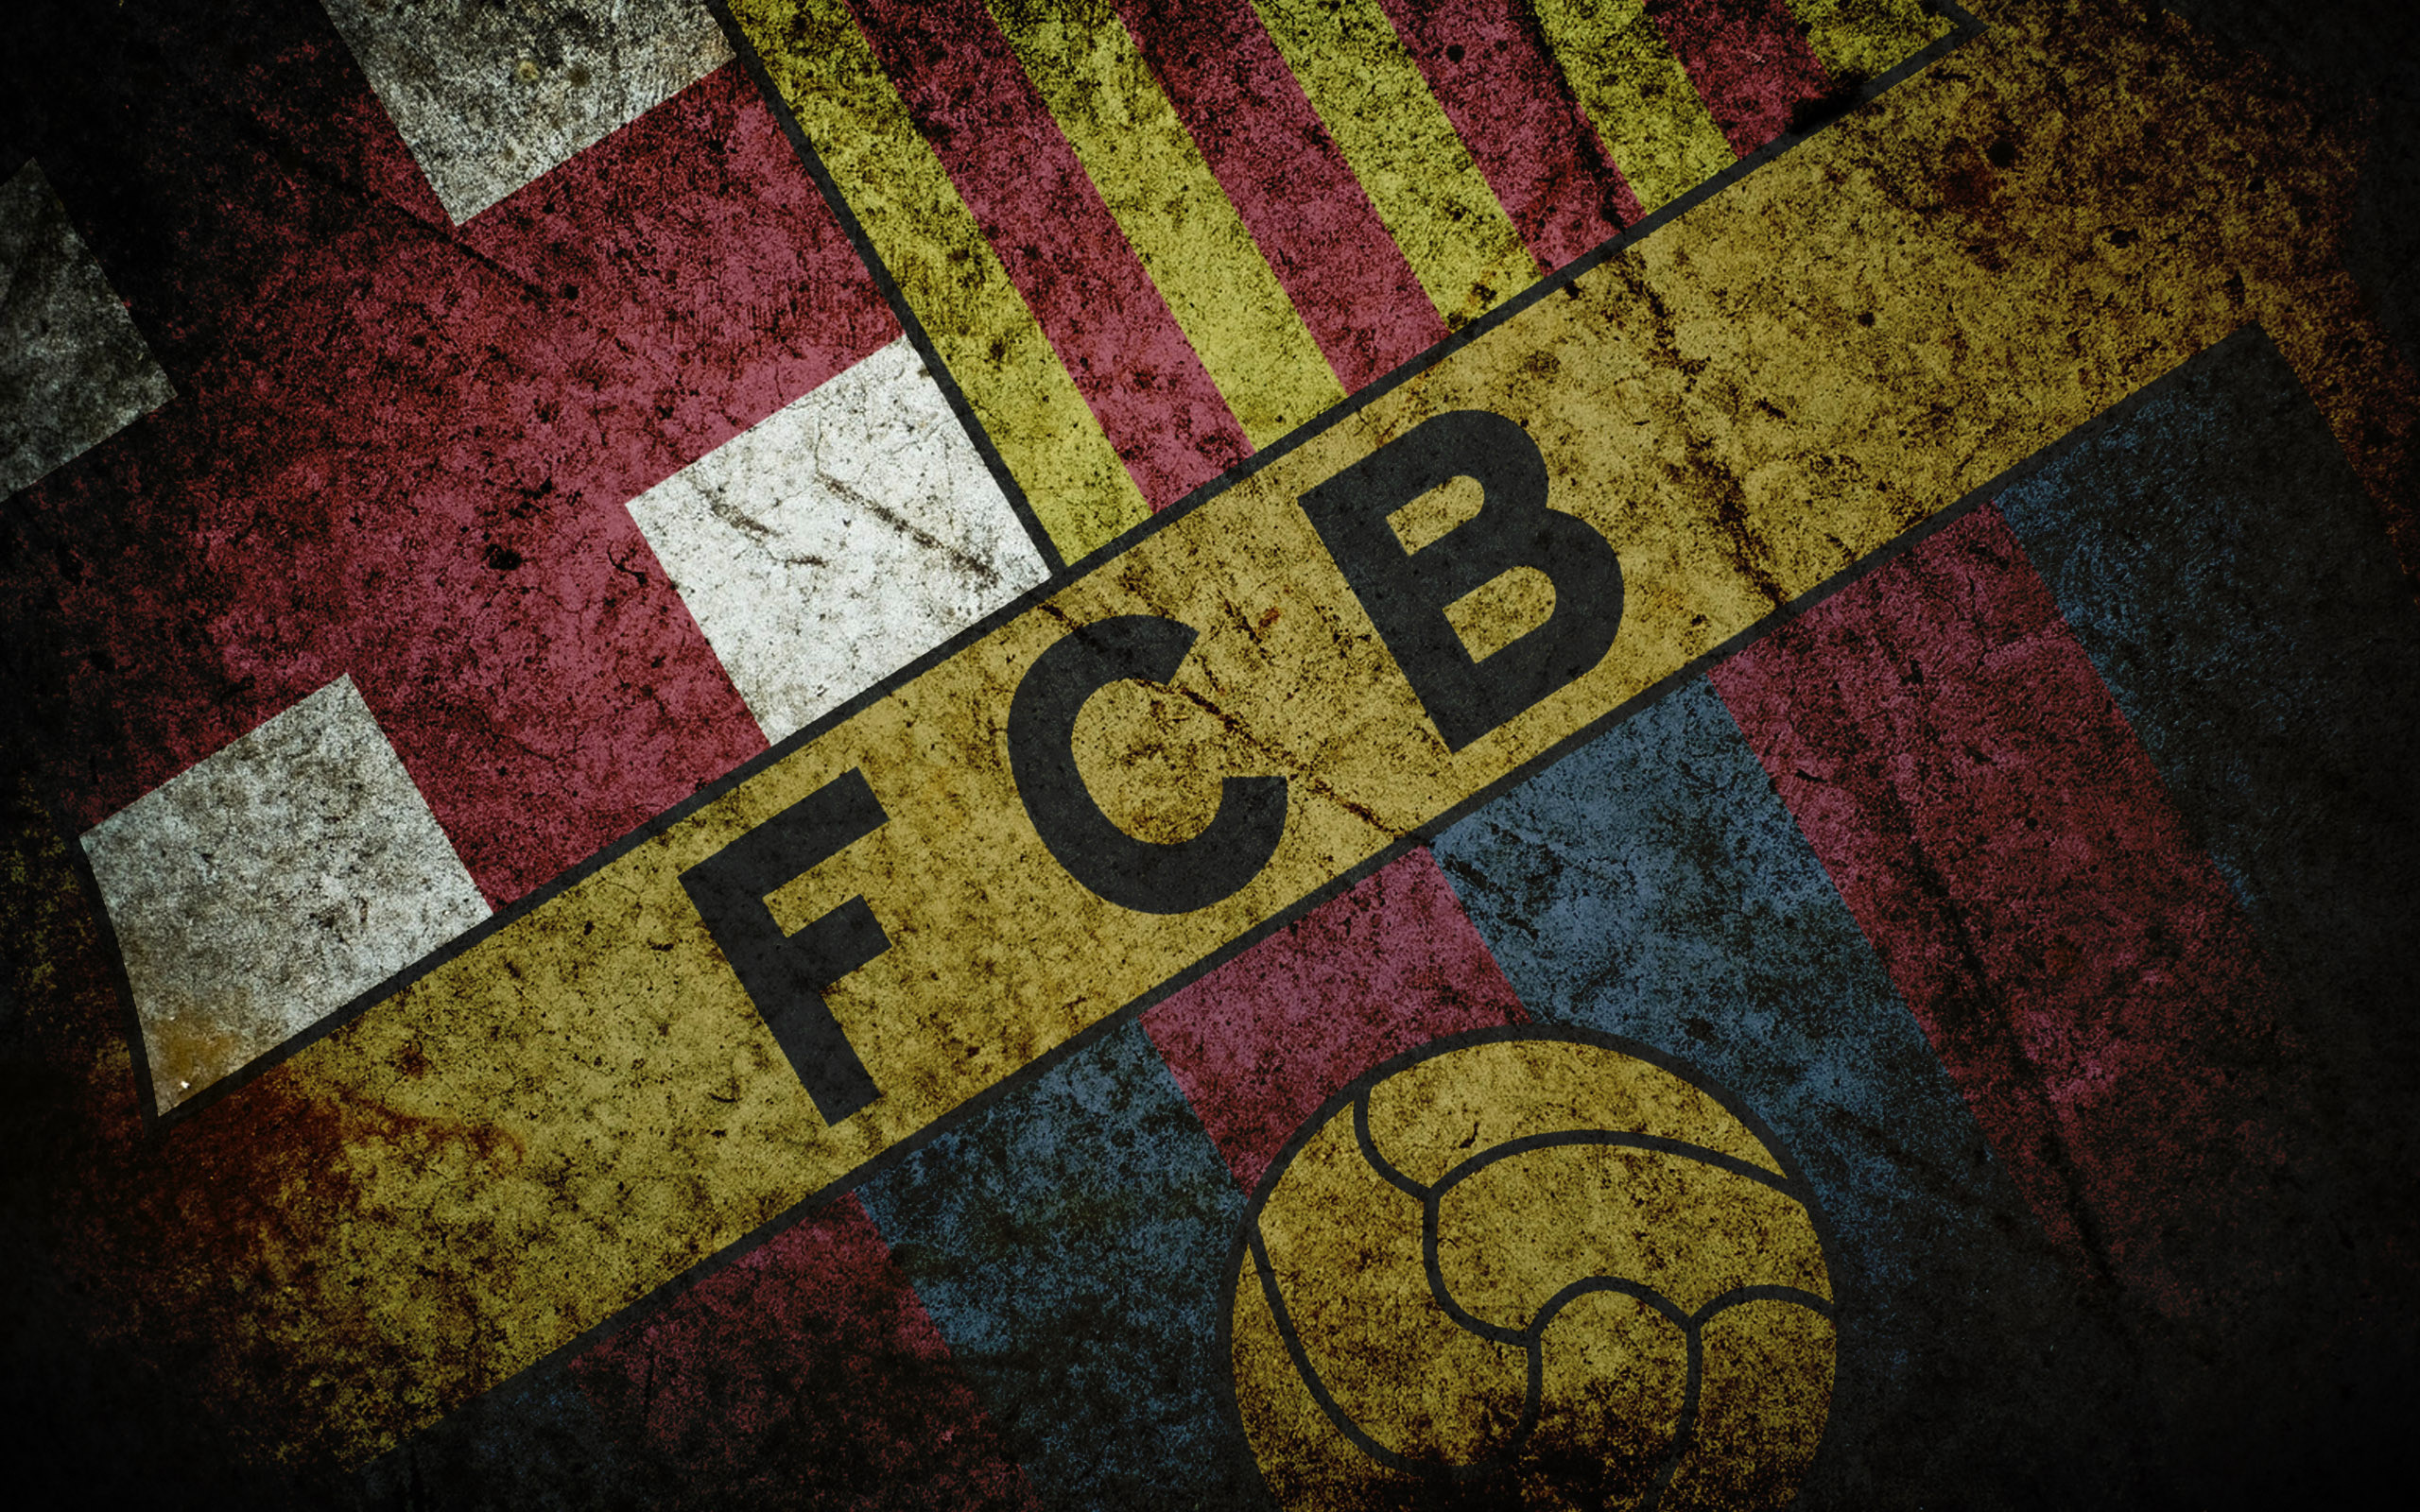 Fcb Hd Wallpapers 2018 85 Images HD Wallpapers Download Free Images Wallpaper [wallpaper981.blogspot.com]